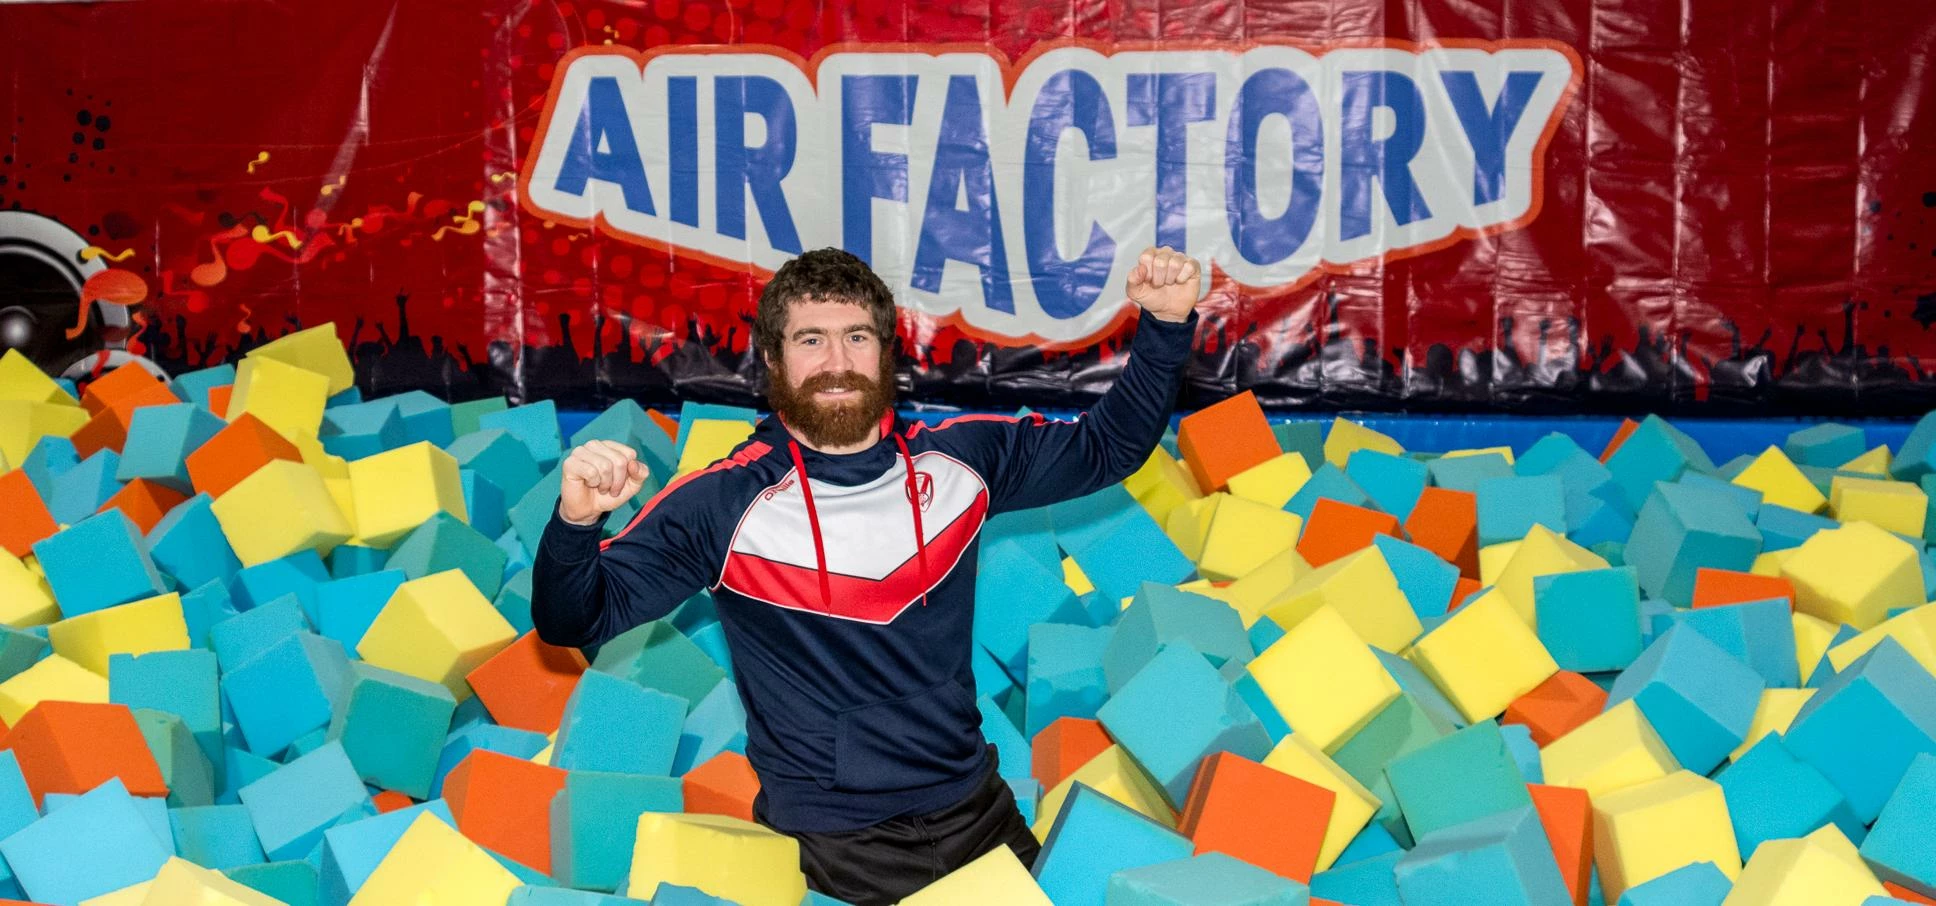 St Helen’s prop forward Kyle Amor celebrates his new sponsorship by Air Factory trampoline park